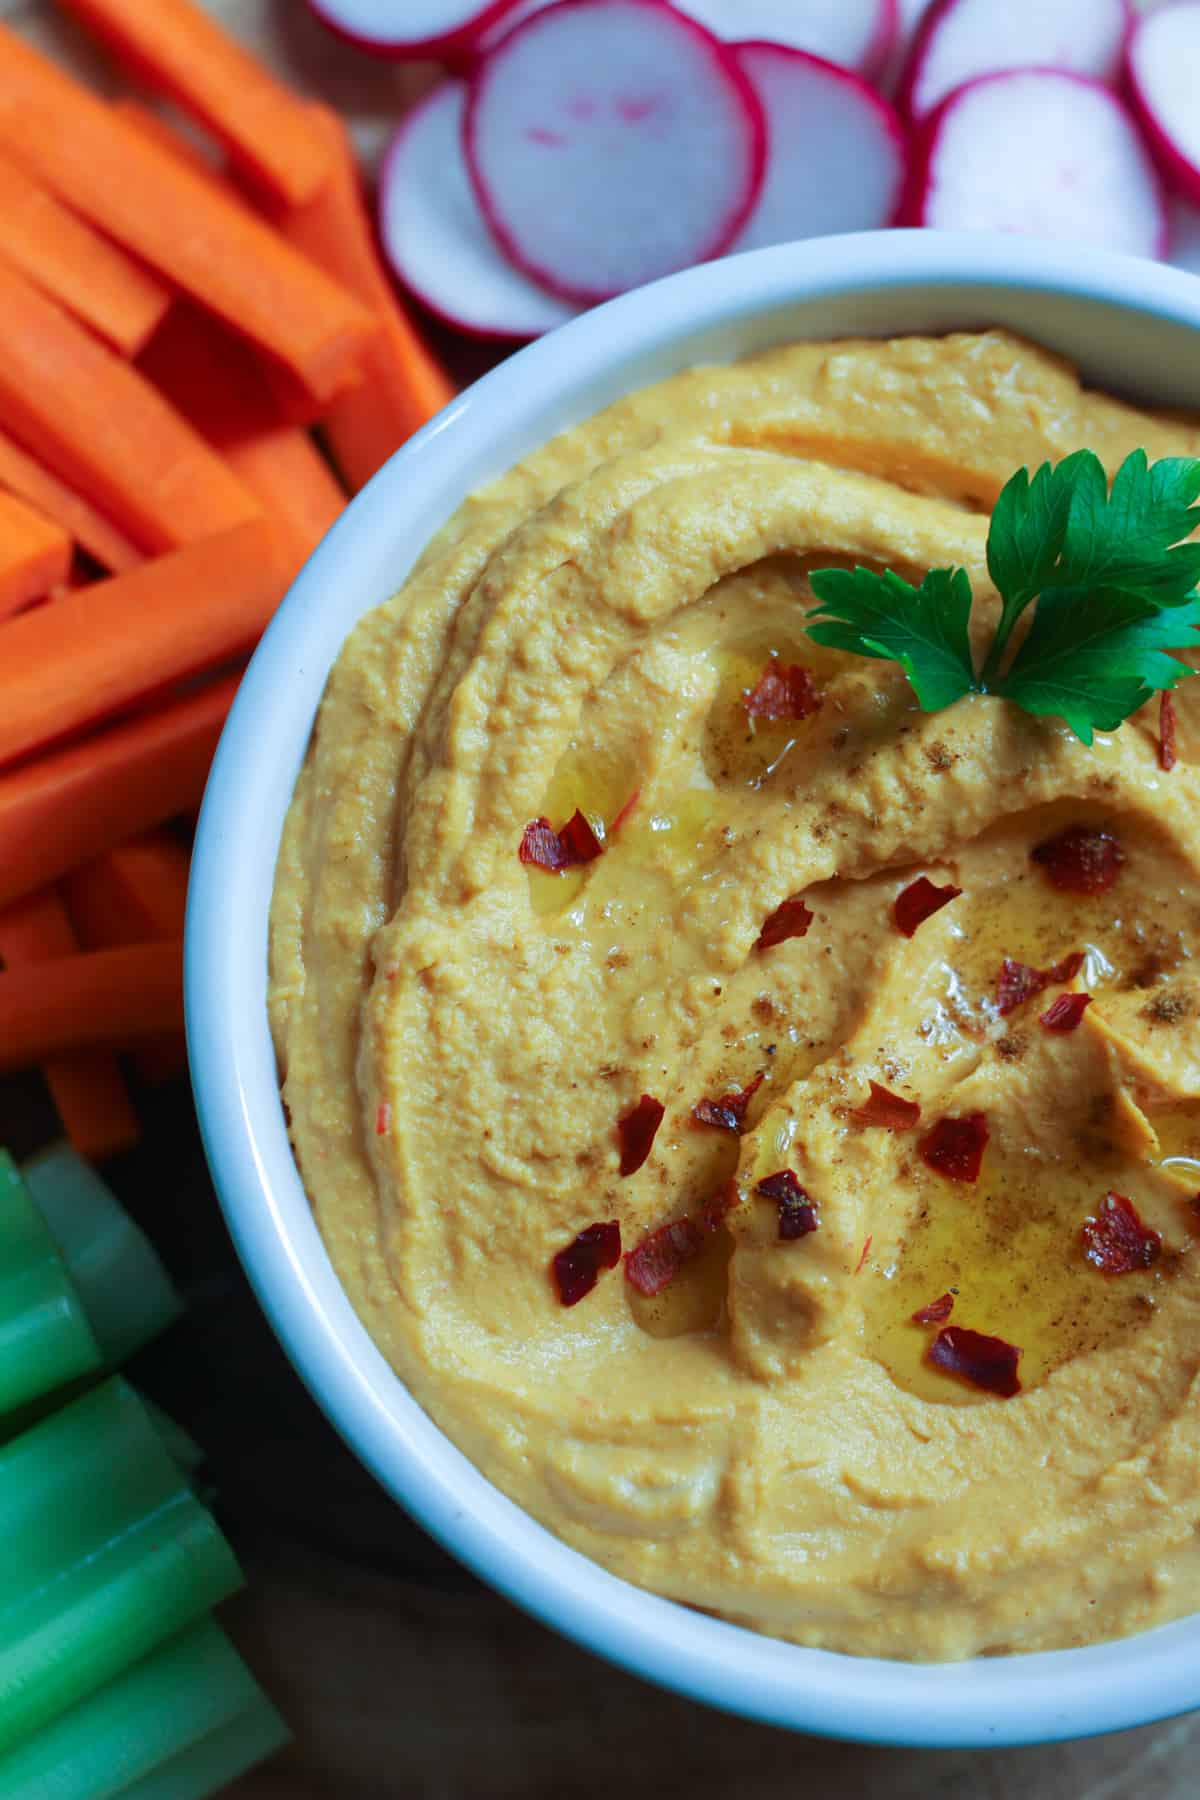 spicy hummus recipe is easy to follow and is topped with parsley, olive oil and pepper flakes. 